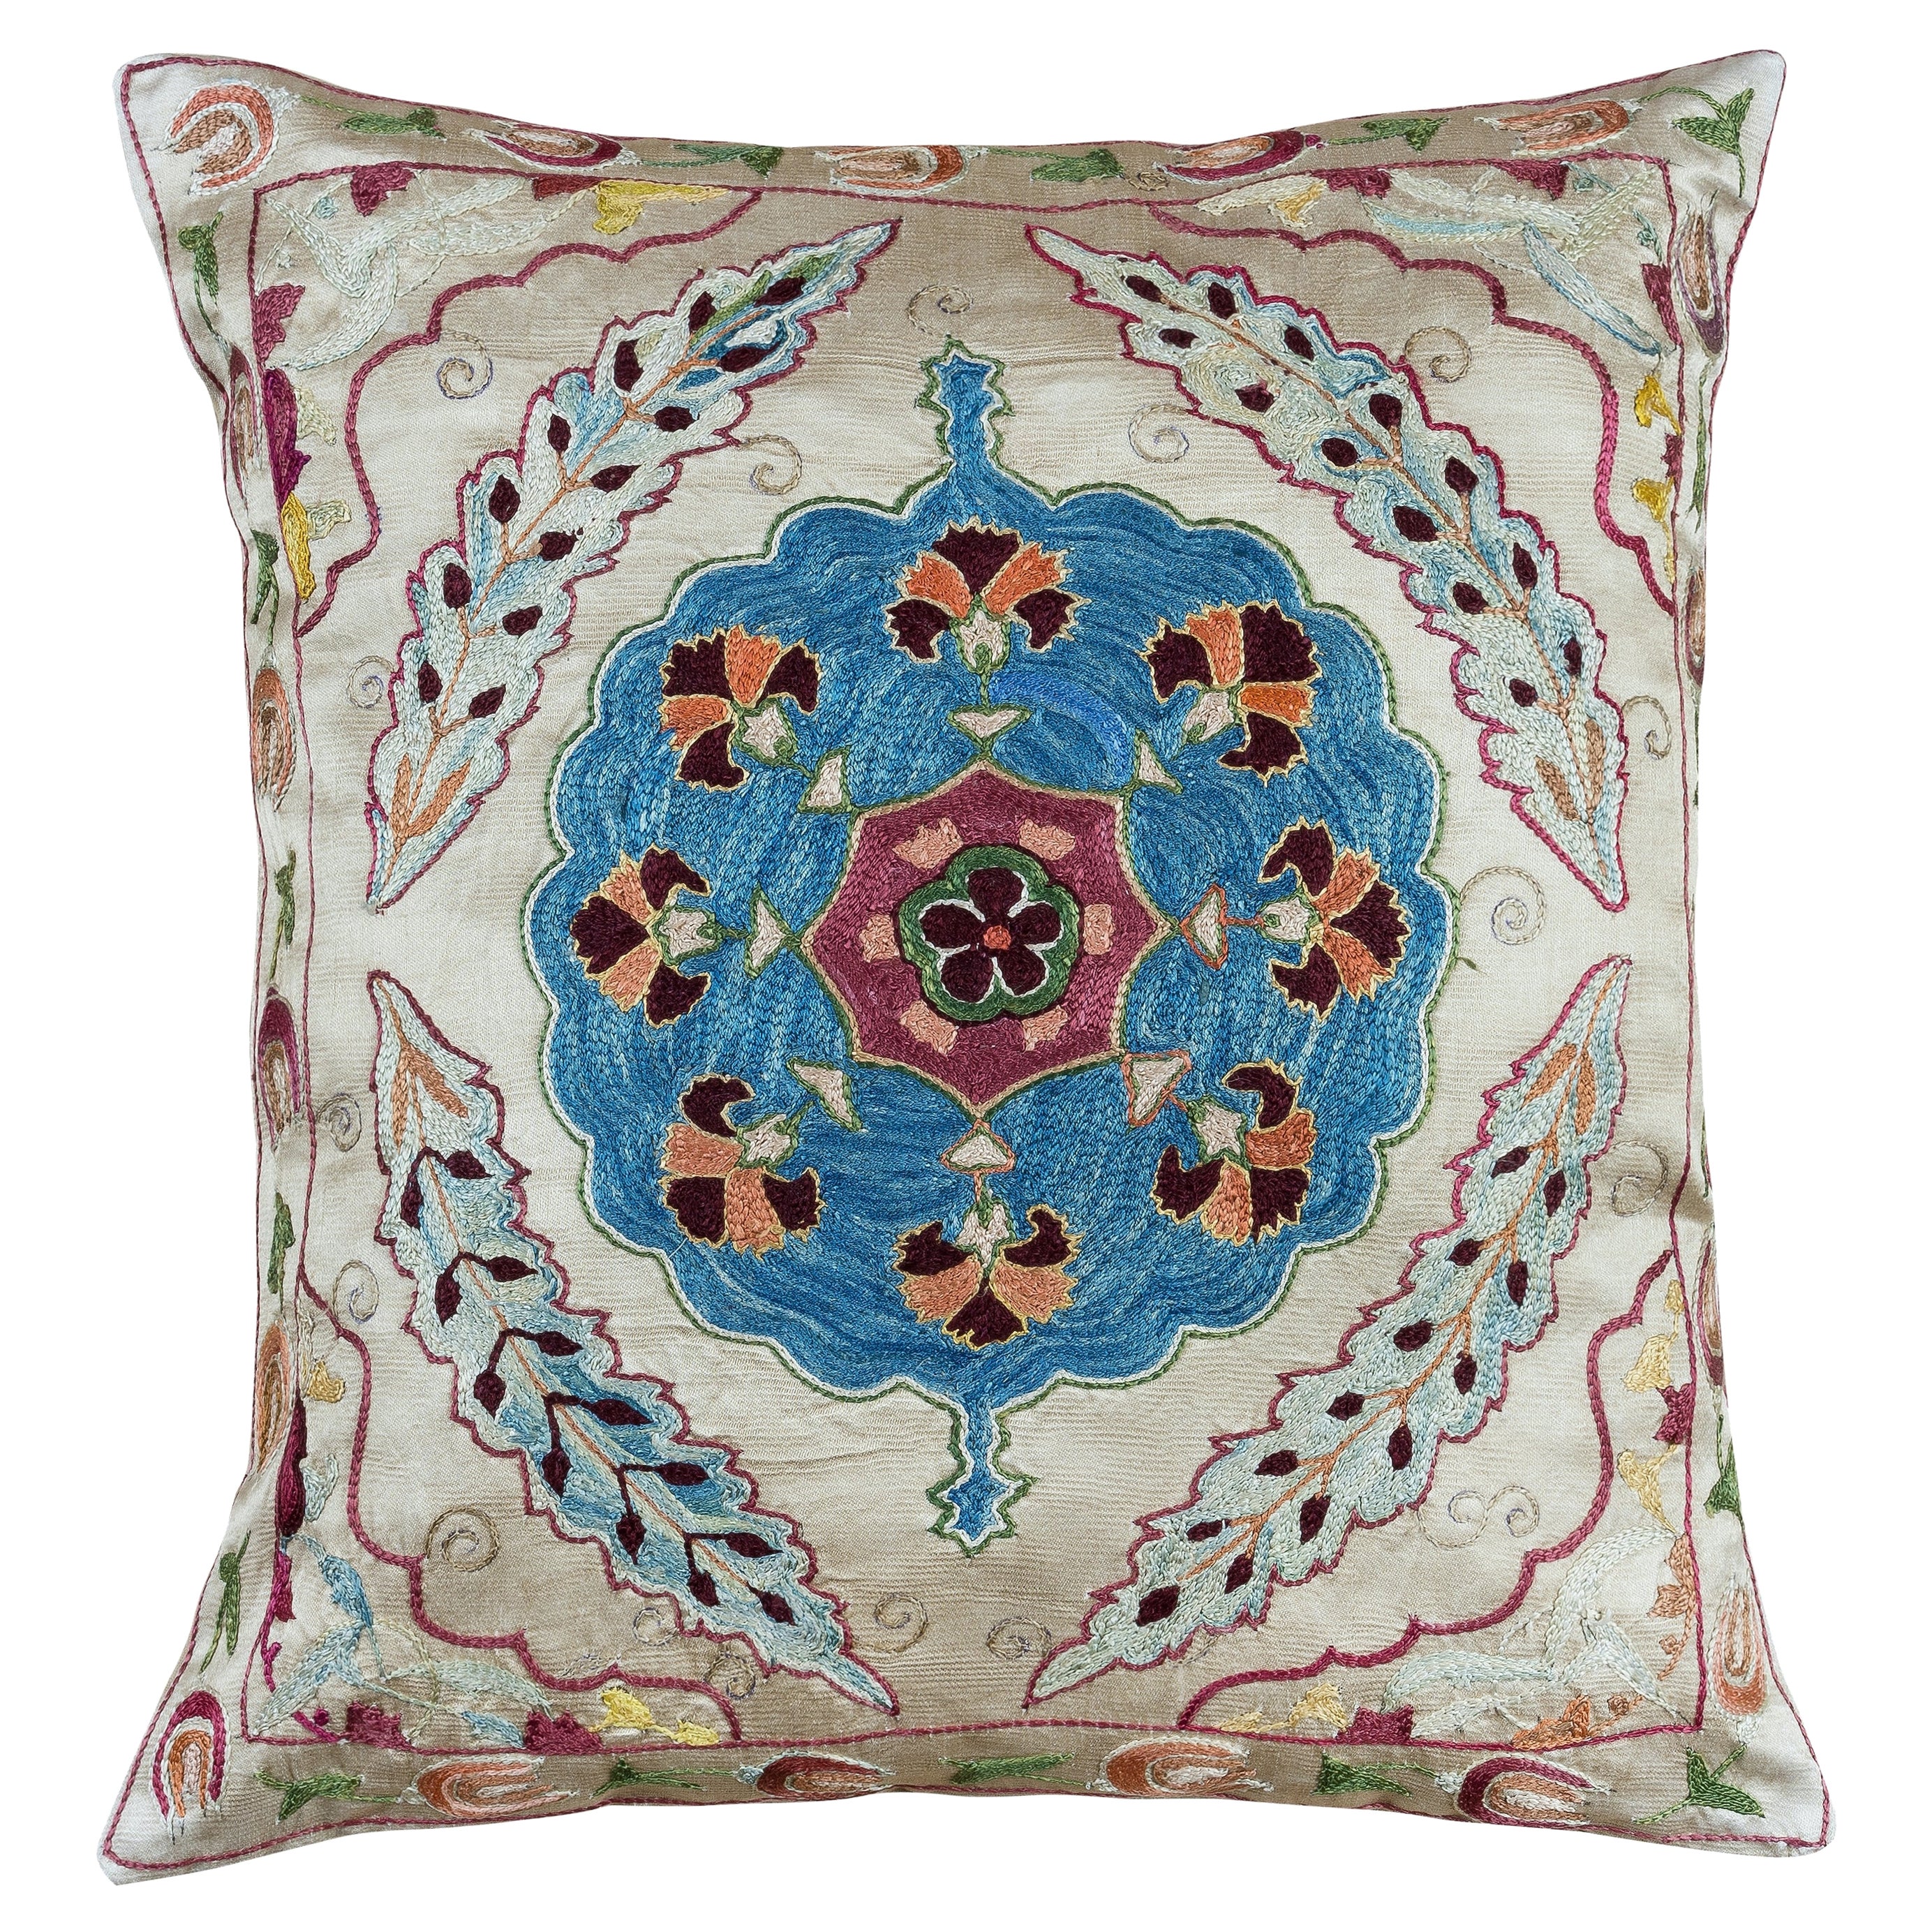 Hand Embroidered 100% Silk Cushion Cover, Suzani Accent Throw Pillow, 18" x 20" For Sale